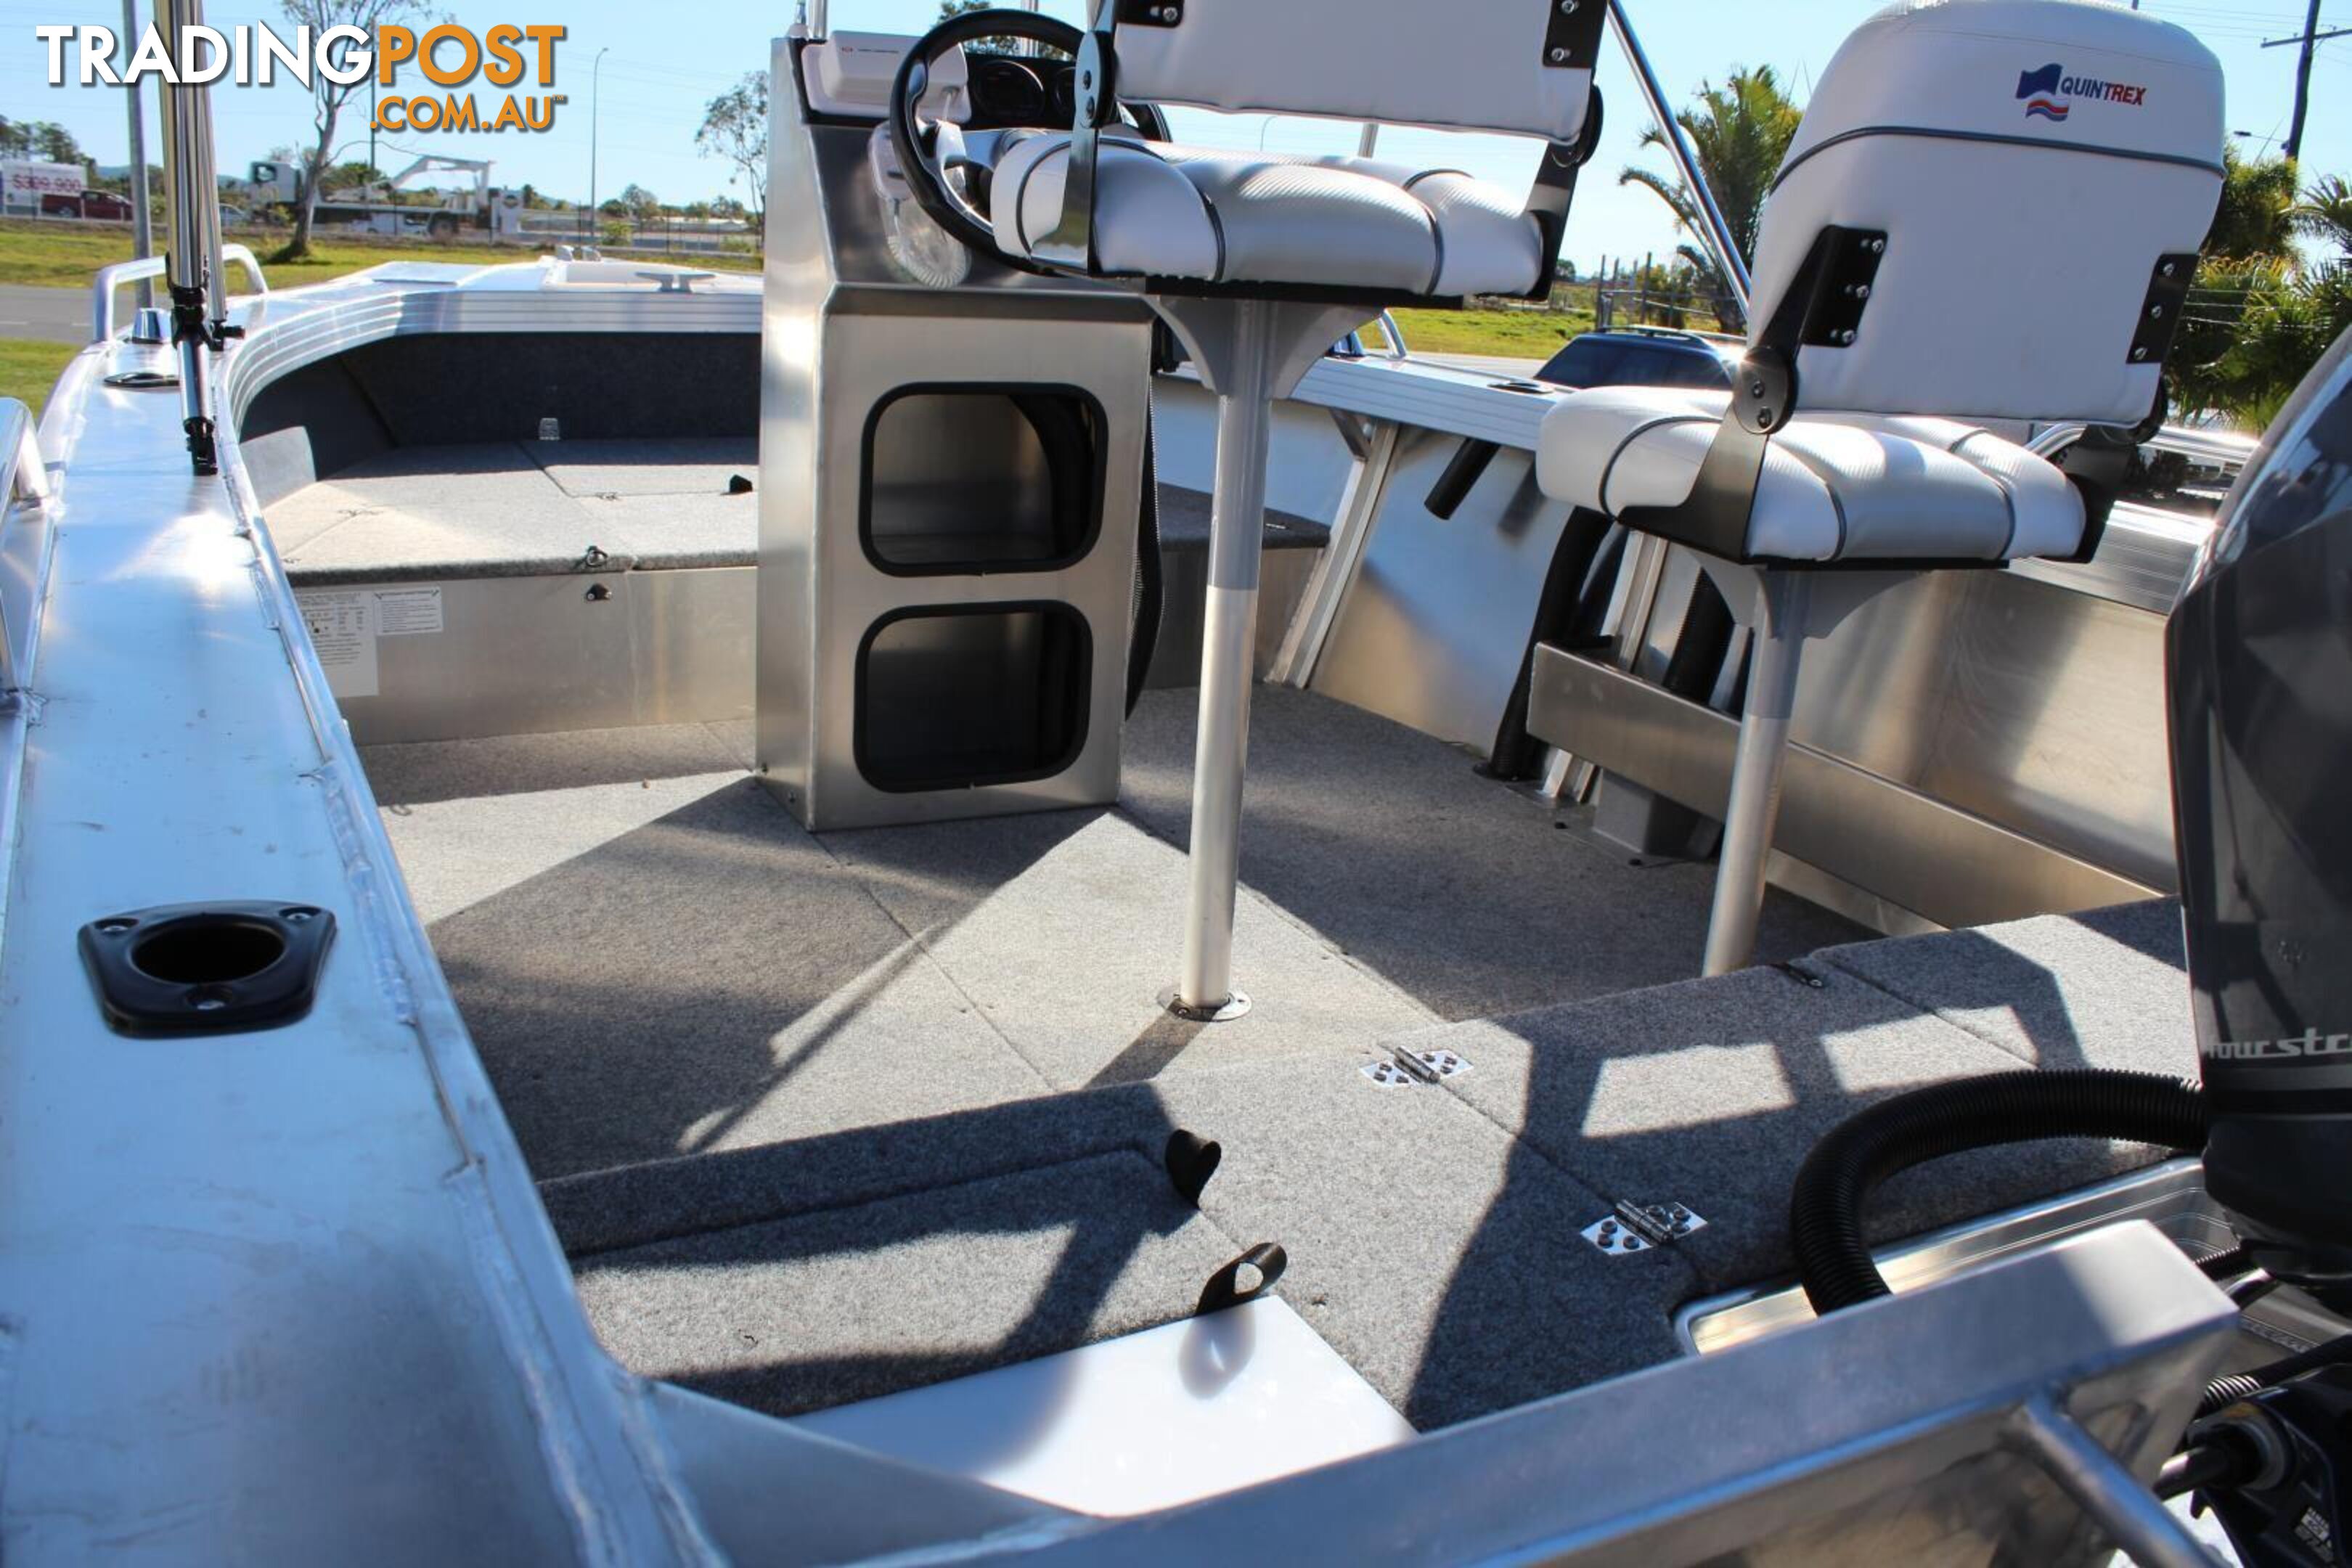 Quintrex 440 Renegade CC(Centre Console) + Yamaha F60hp 4-Stroke - Pack 2 for sale online prices